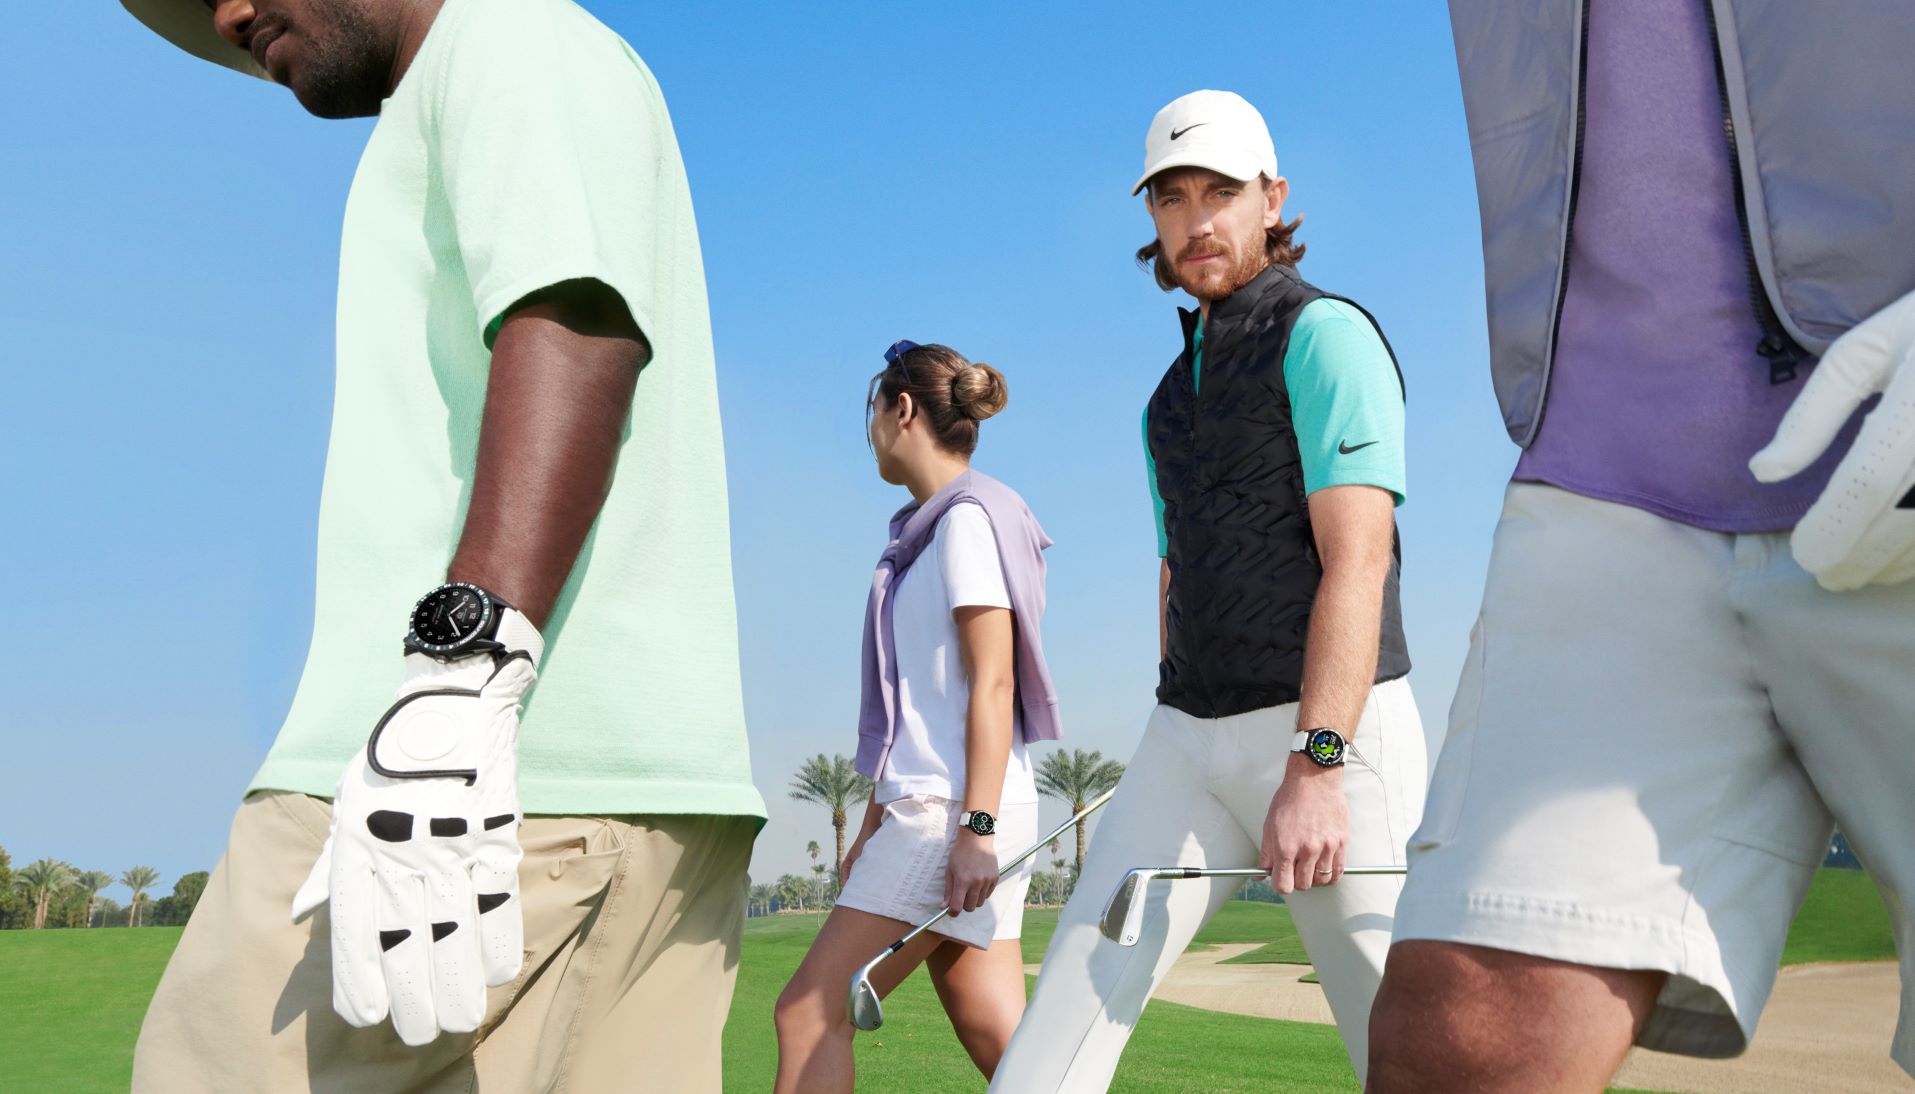 TAG Heuer presents the new CONNECTED CALIBRE E4 smart watch golf special edition